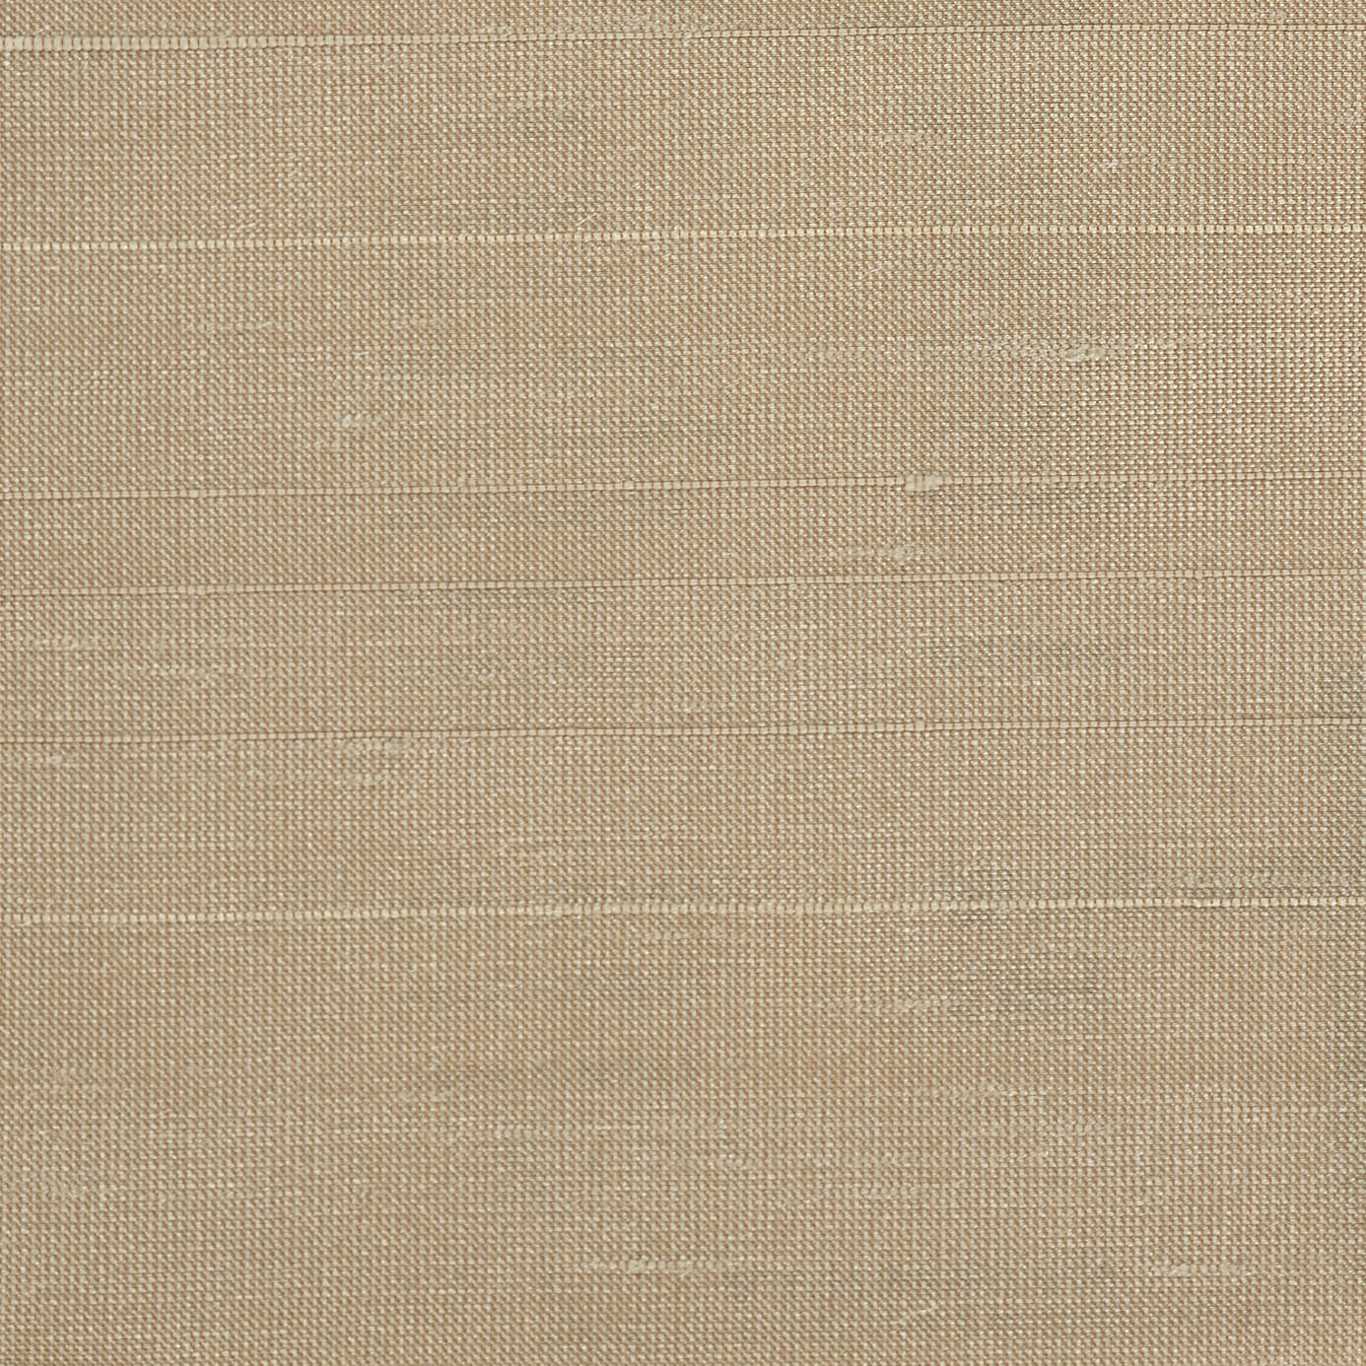 Deflect Fabric by Harlequin - HPOL440443 - Almond